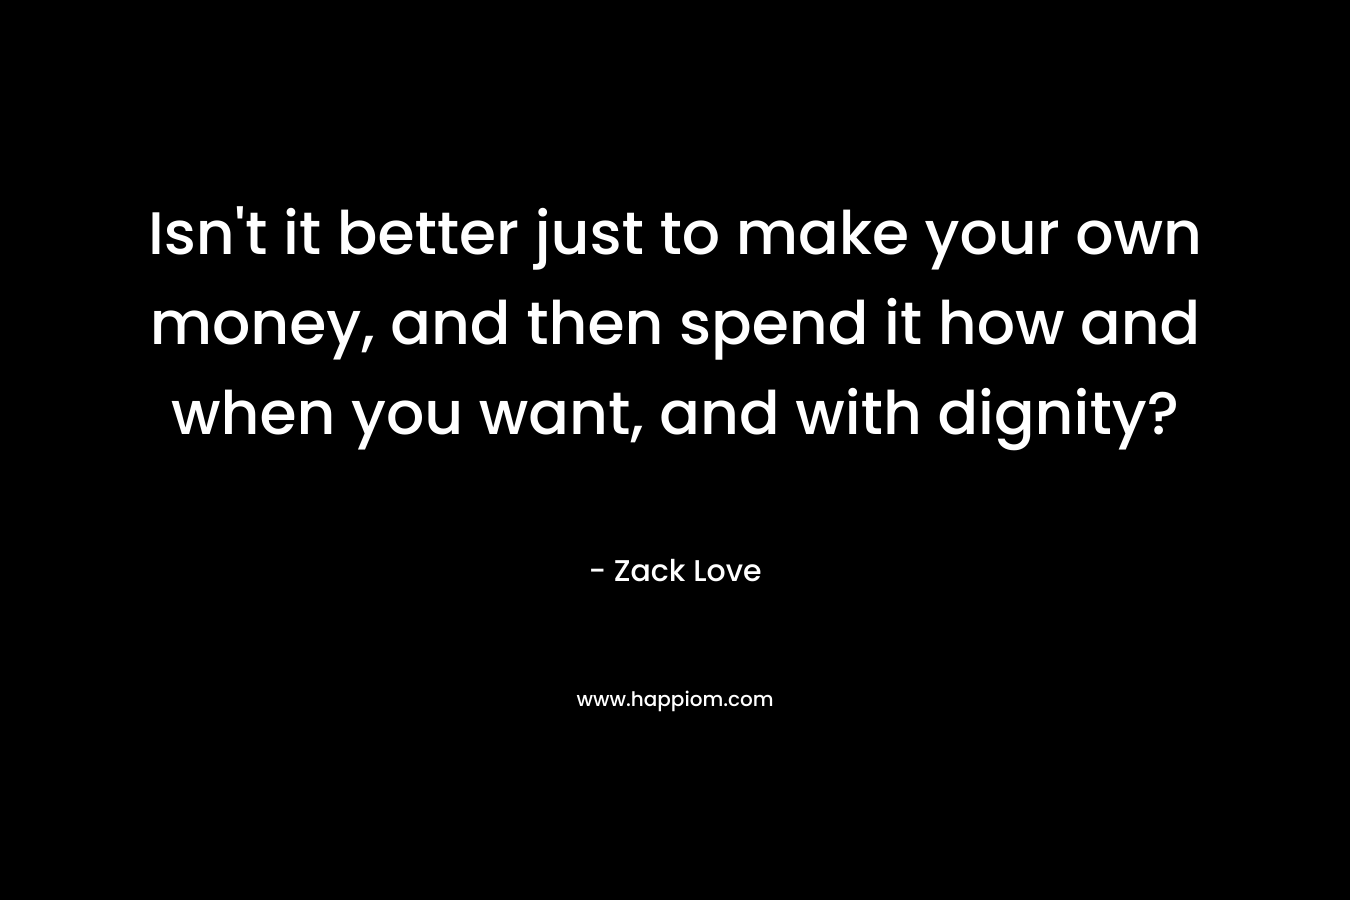 Isn’t it better just to make your own money, and then spend it how and when you want, and with dignity? – Zack Love